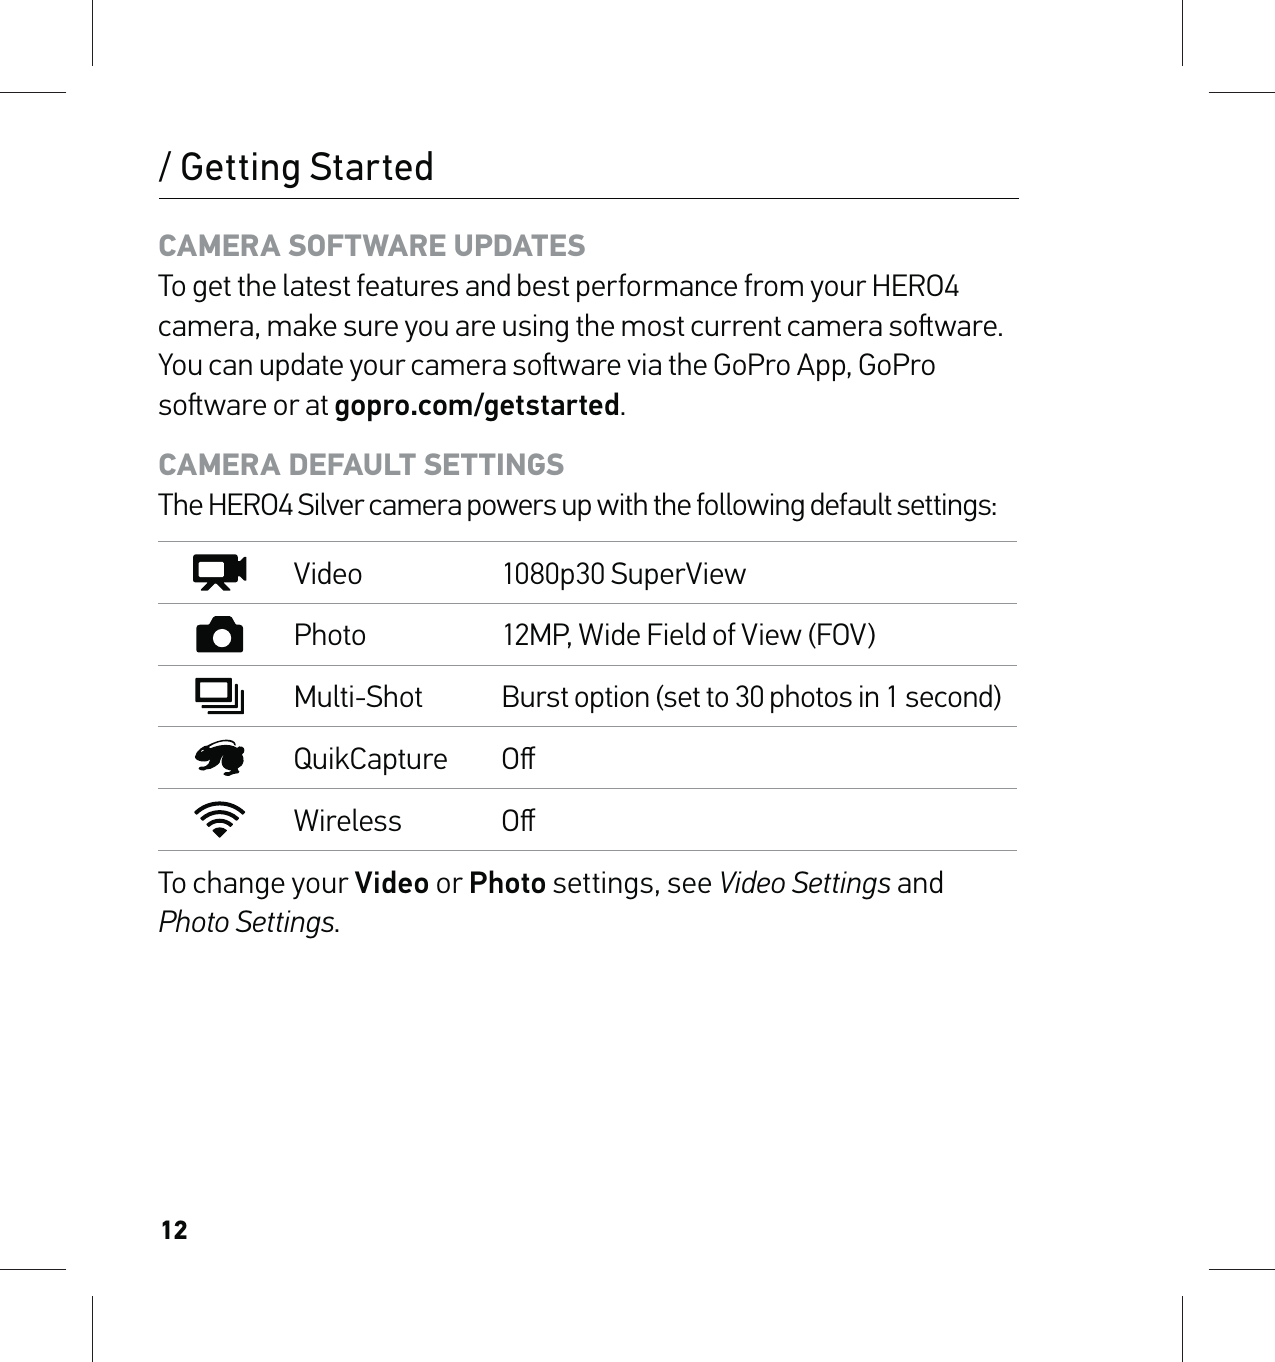 12CAMERA SOFTWARE UPDATES To get the latest features and best performance from your HERO4 camera, make sure you are using the most current camera soware. You can update your camera soware via the GoPro App, GoPro soware or at gopro.com/getstarted.CAMERA DEFAULT SETTINGS The HERO4 Silver camera powers up with the following default settings:Video 1080p30 SuperViewPhoto 12MP, Wide Field of View (FOV)Multi-Shot Burst option (set to 30 photos in 1 second)QuikCapture OﬀWireless OﬀTo change your Video or Photo settings, see Video Settings and  Photo Settings./ Getting Started